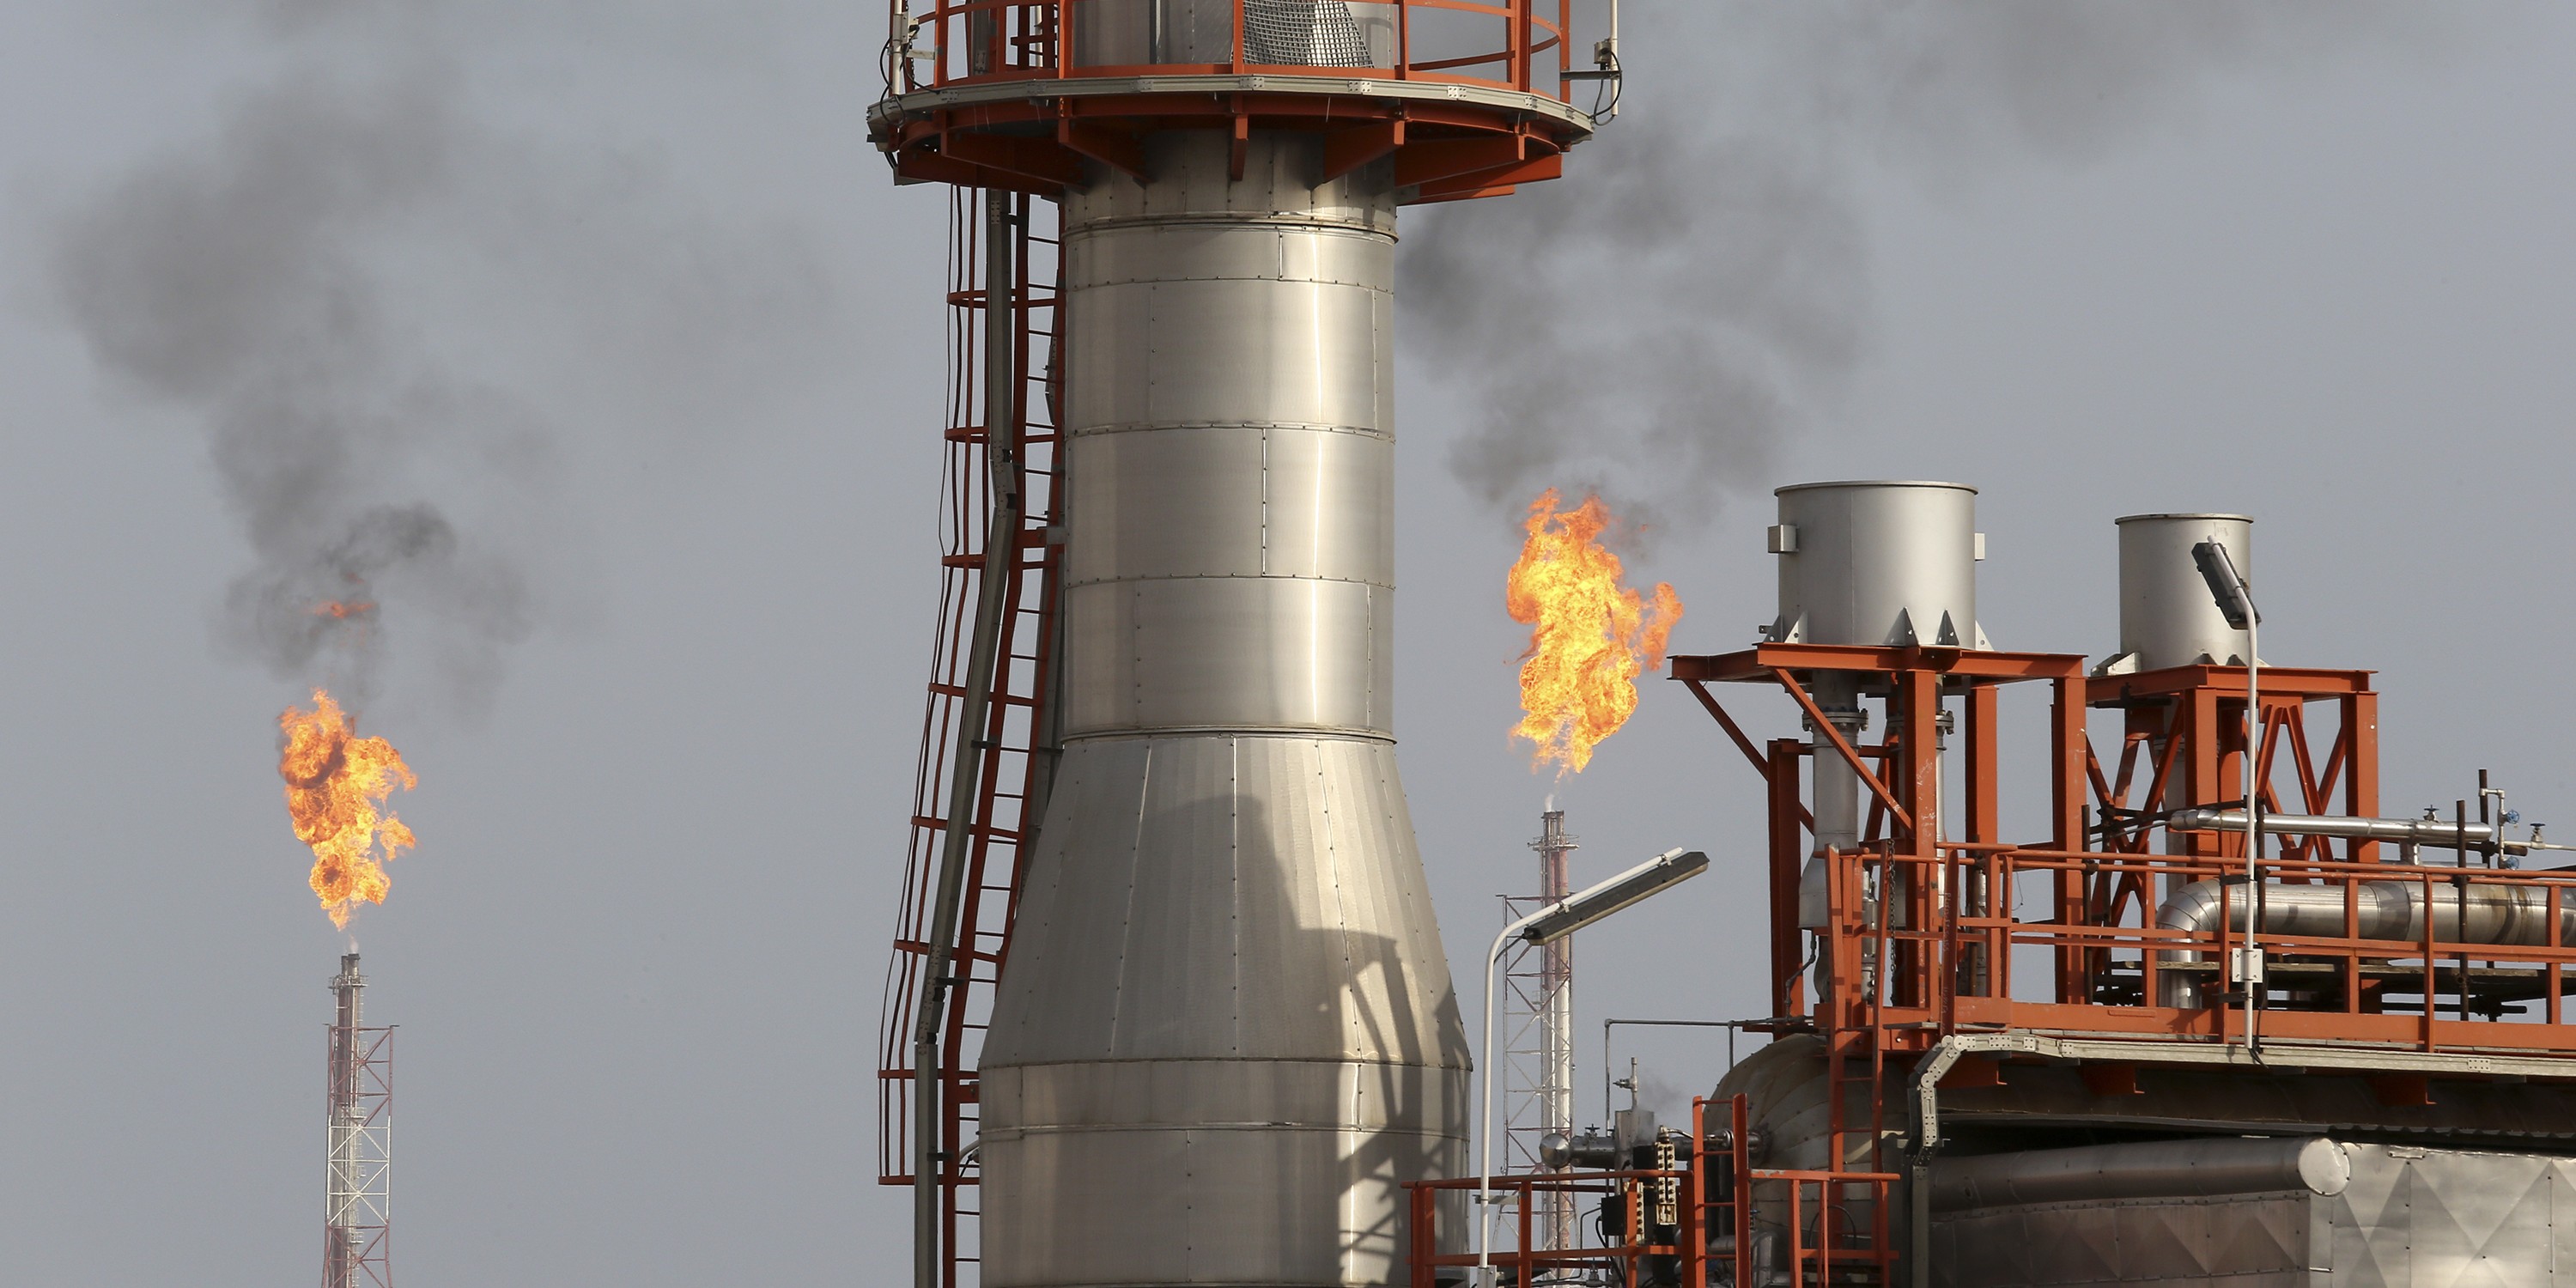 FILE - This March 16, 2019 file photo, shows a natural gas refinery at the South Pars gas field constructed by Revolutionary Guard-affiliated company, Khatam al-Anbia, the largest Iranian contractor of government construction projects, on the northern coast of the Persian Gulf, in Asaluyeh, Iran. On Monday, April 8, 2019, the Trump administration designated Iran’s Revolutionary Guard a “foreign terrorist organization” in an unprecedented move against a national armed force. (AP Photo/Vahid Salemi, File)